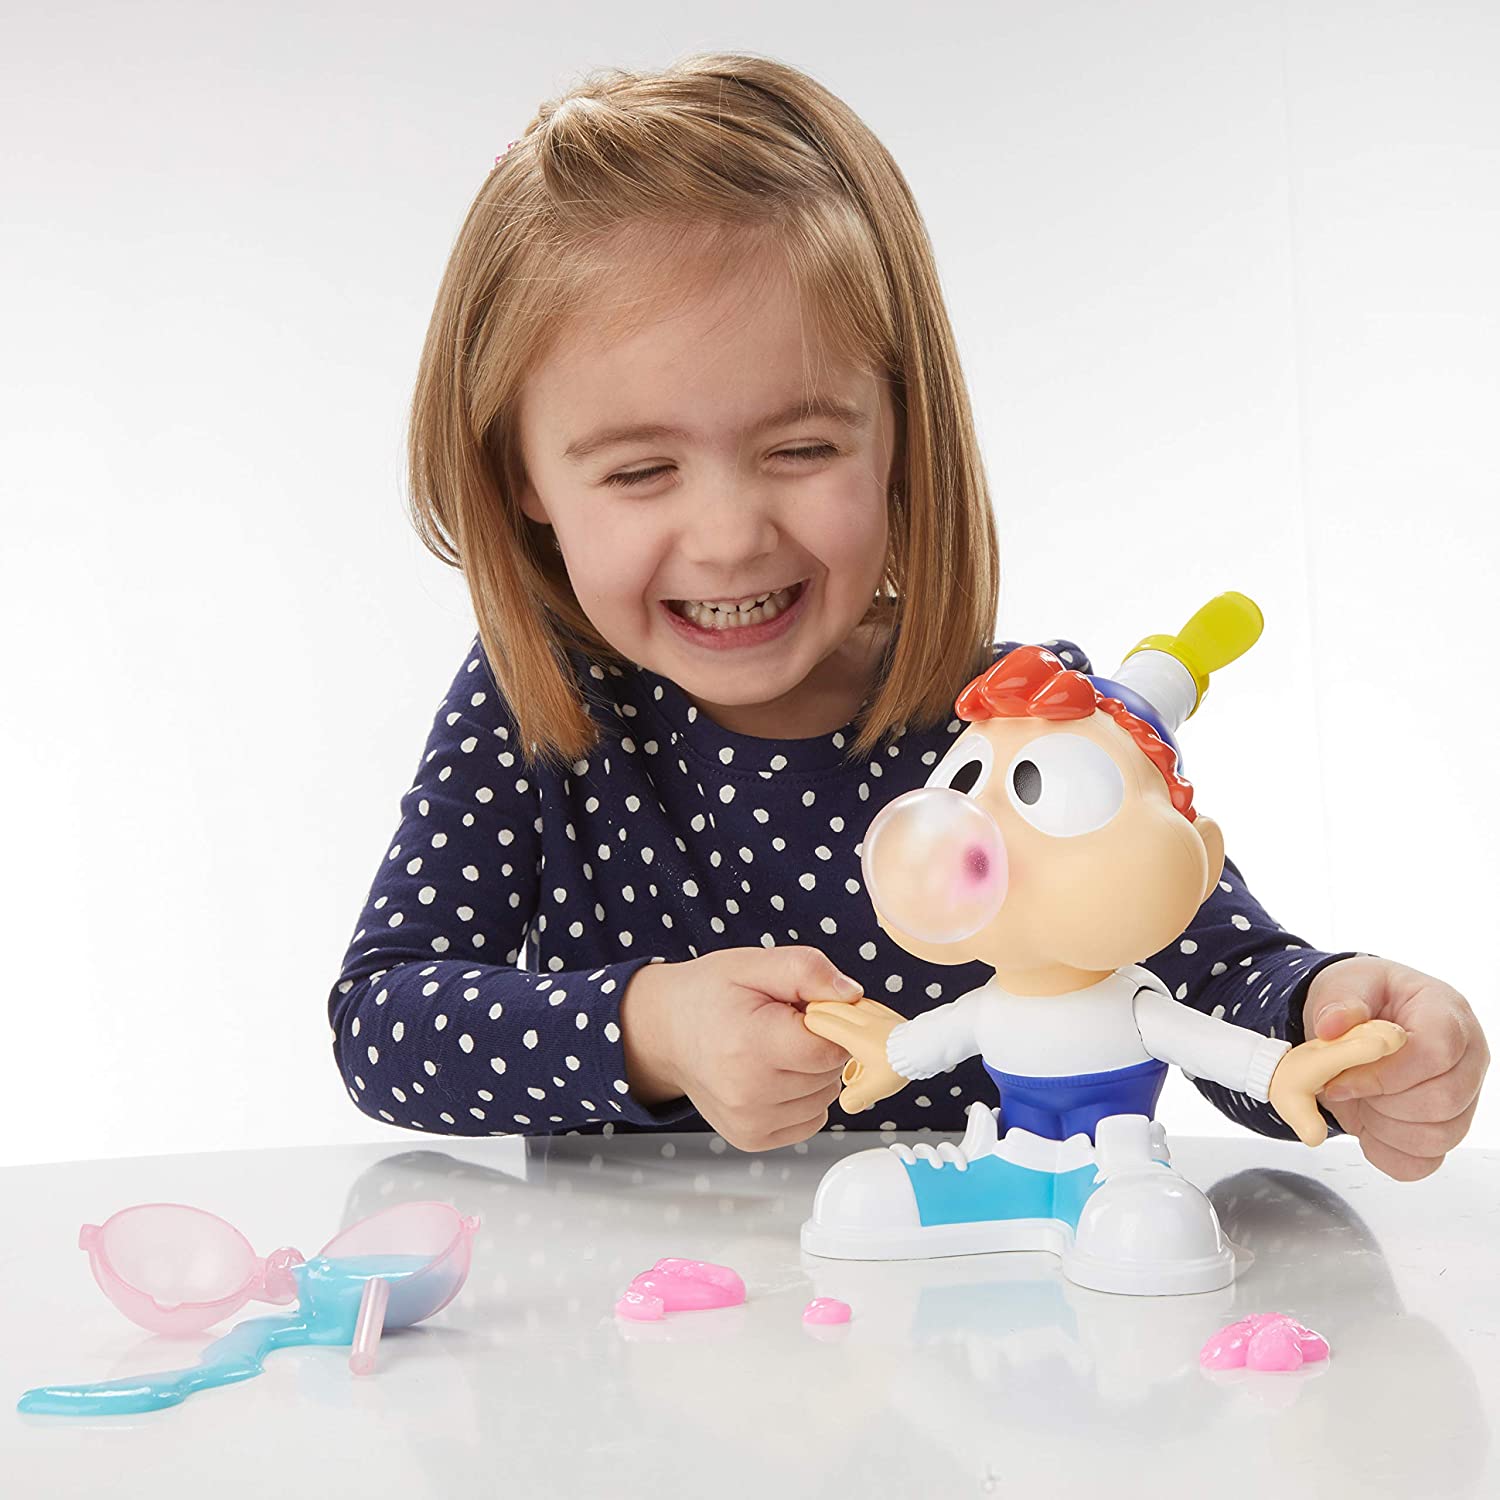 Play-Doh Slime Chewin Charlie Playset